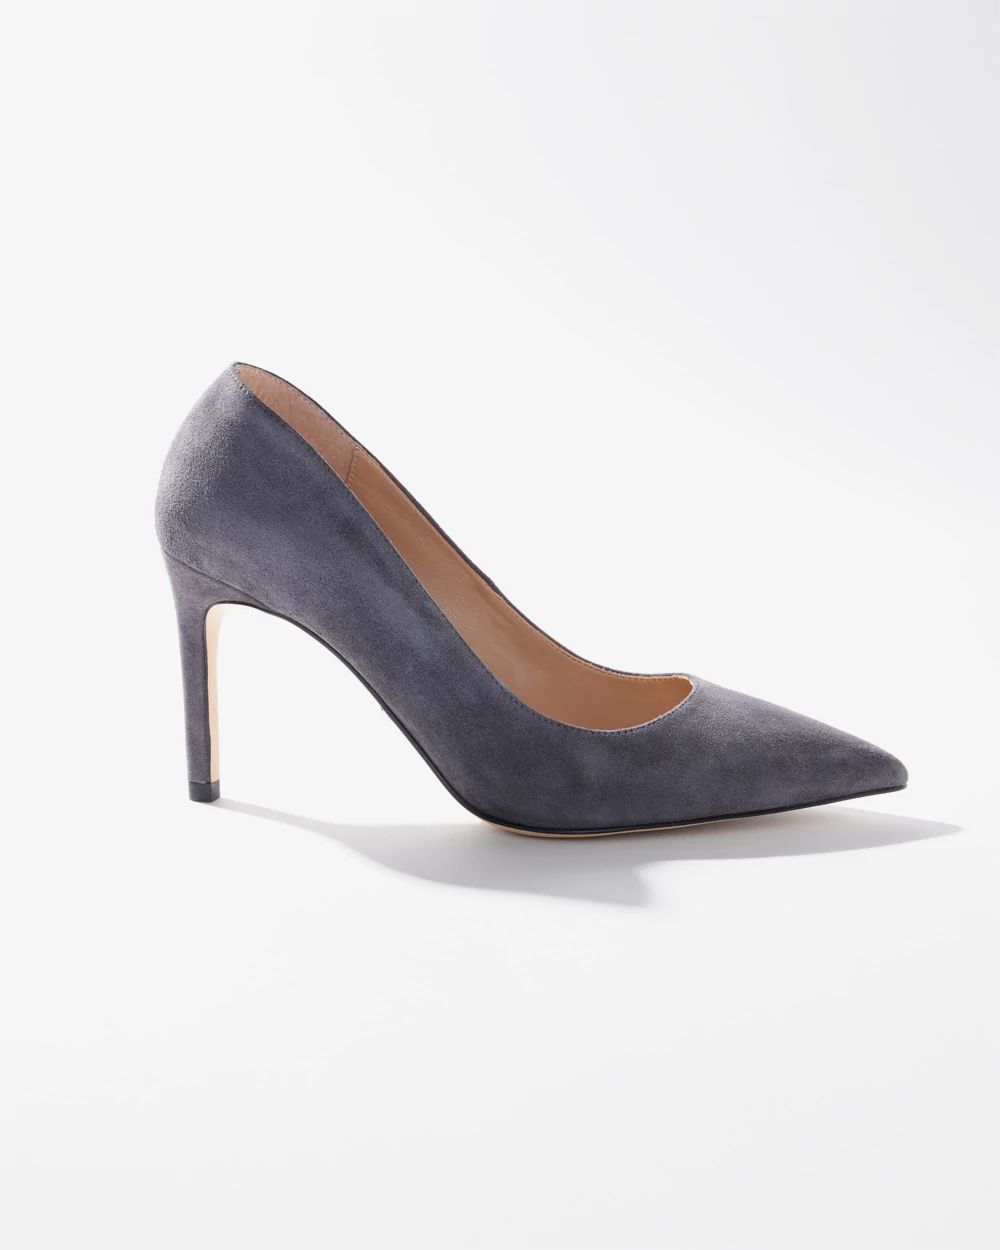 Grey Suede Comfort Pump click to view larger image.